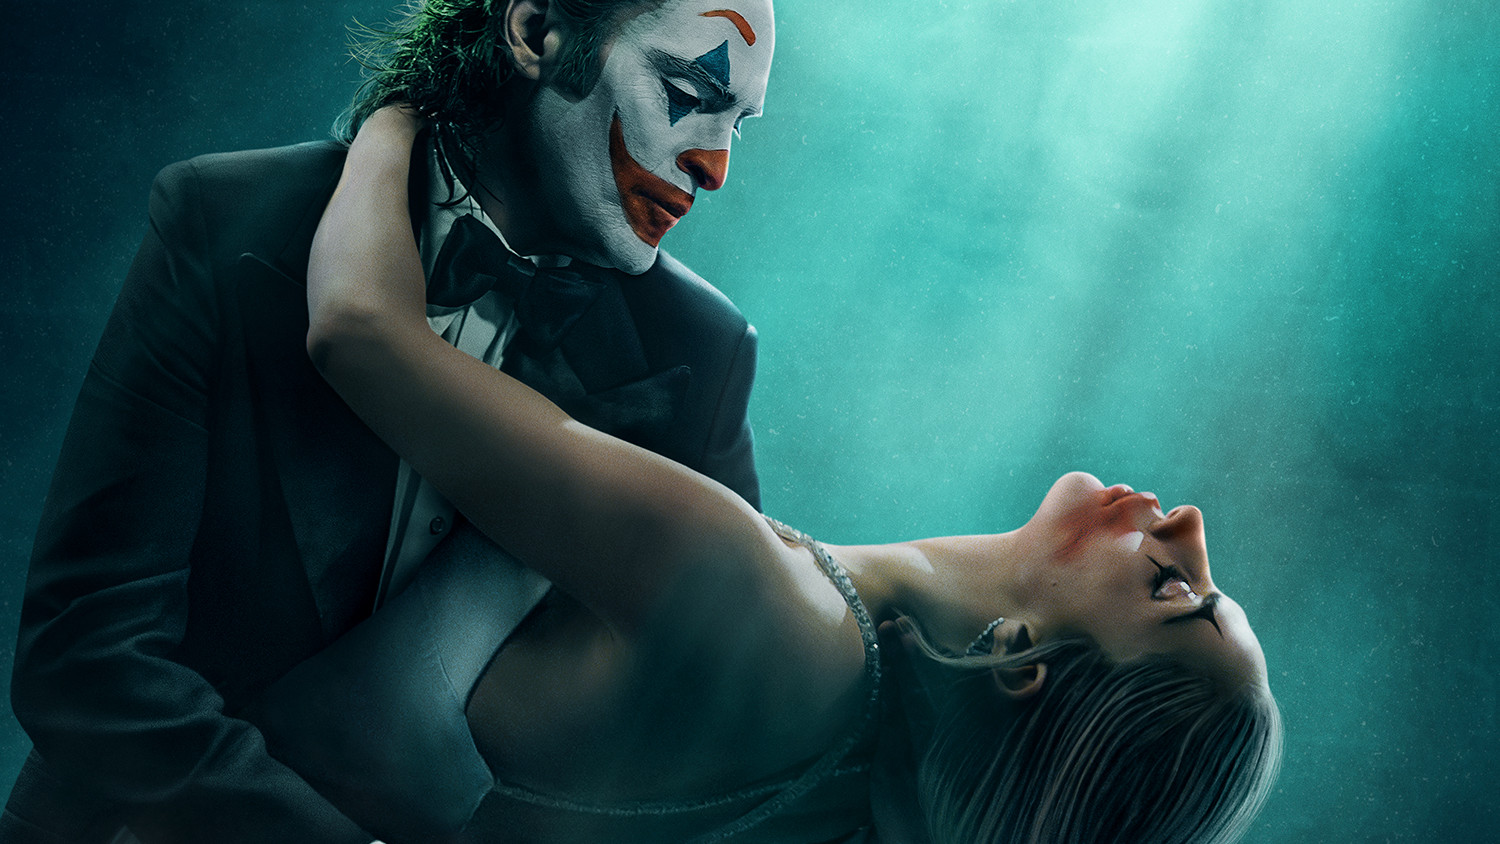 Joker 2 Poster Teases Lady Gaga, ‘The World Is A Stage’ Ahead Of Trailer